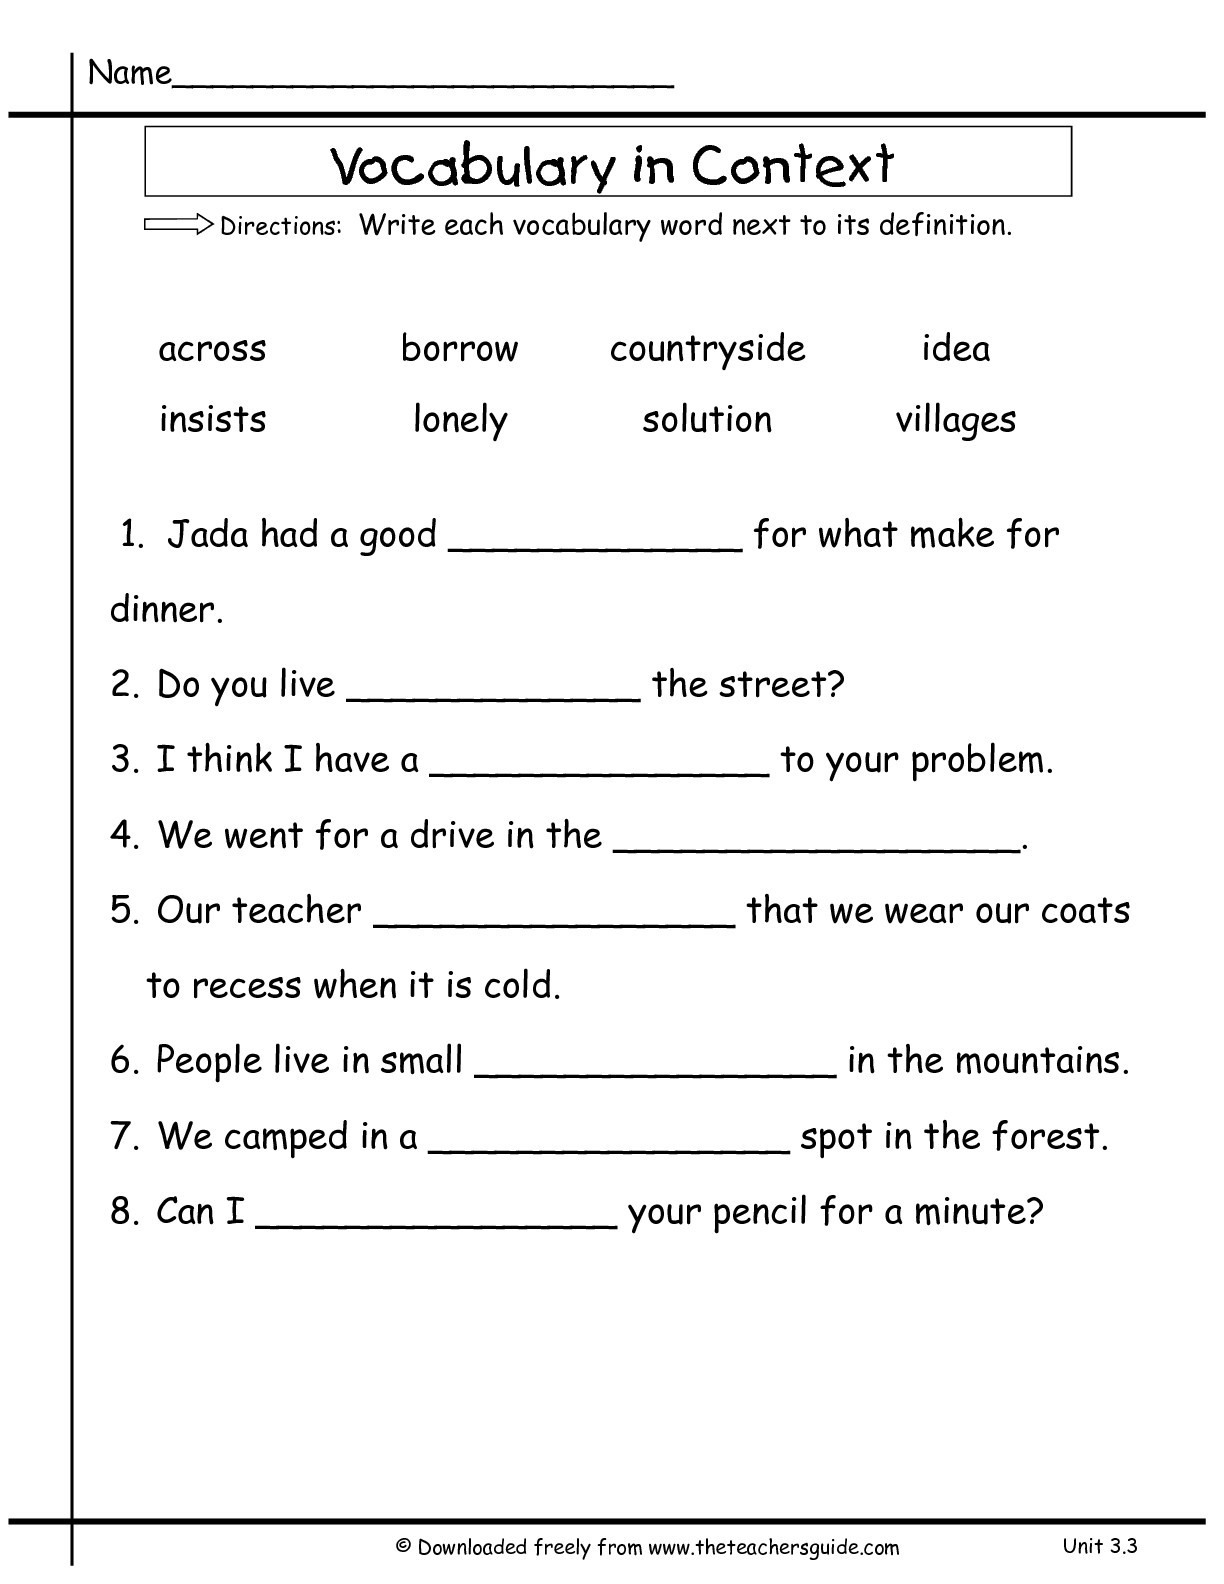 high-school-vocabulary-worksheets-multiplication-facts-db-excel